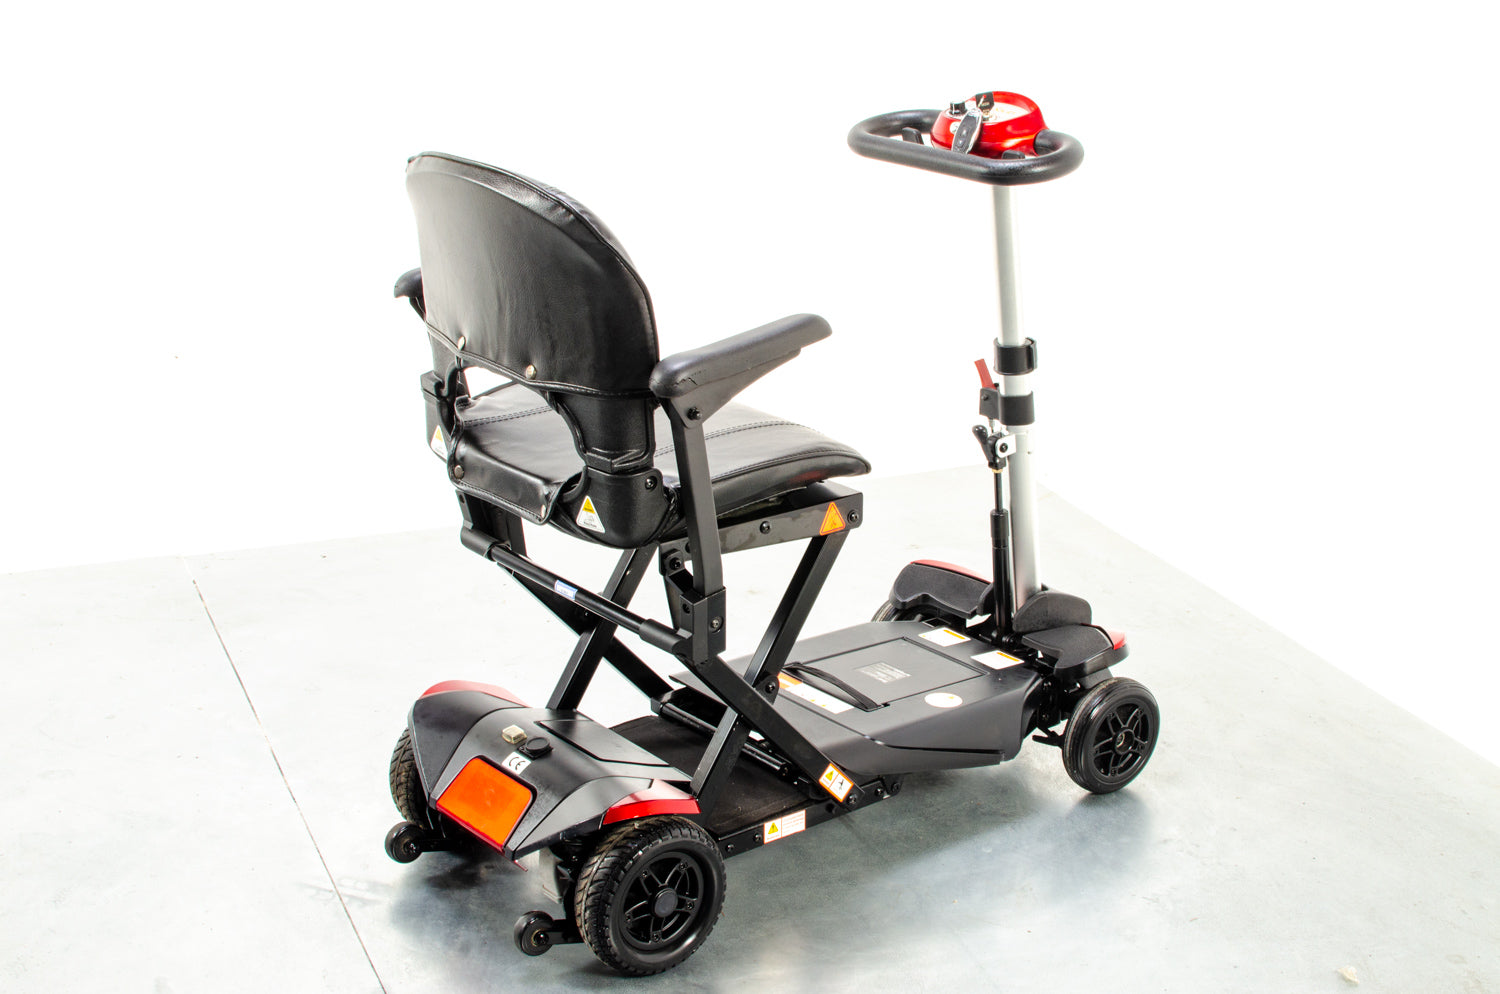 Monarch Smarti Remote Auto-Folding Used Mobility Scooter Lithium Travel Lightweight